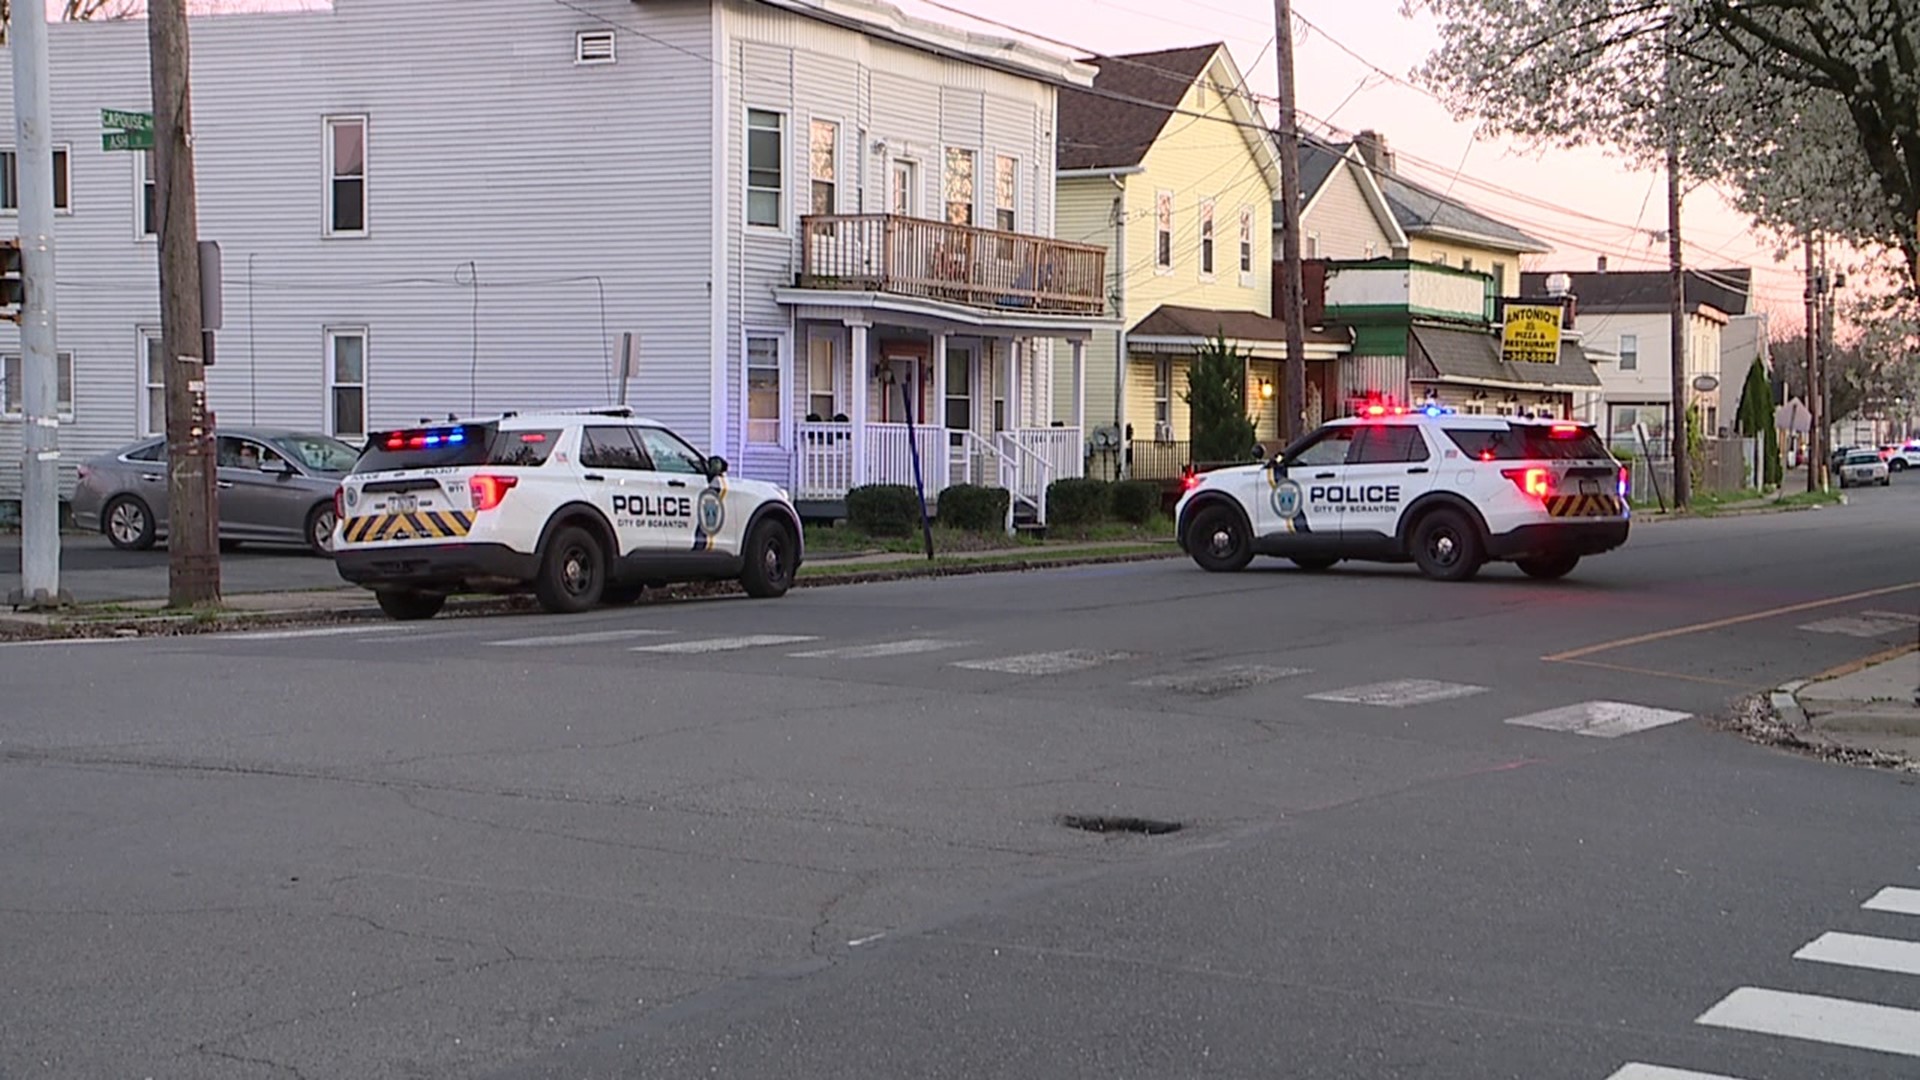 Police responded to the 1100 block of Capouse Avenue around 7:30 p.m. Monday night.